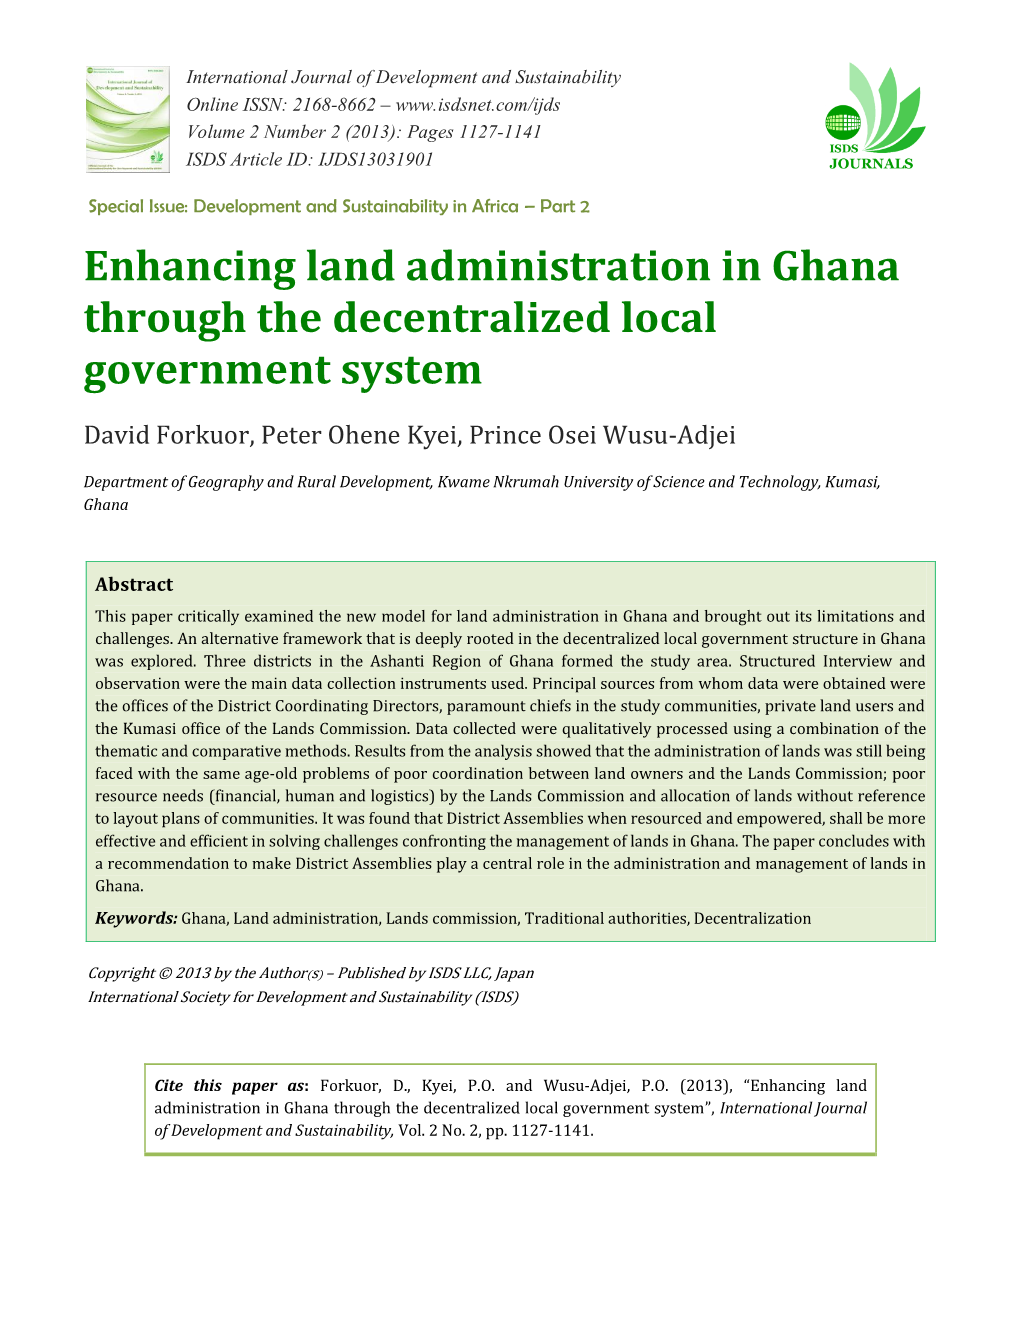 Enhancing Land Administration in Ghana Through the Decentralized Local Government System